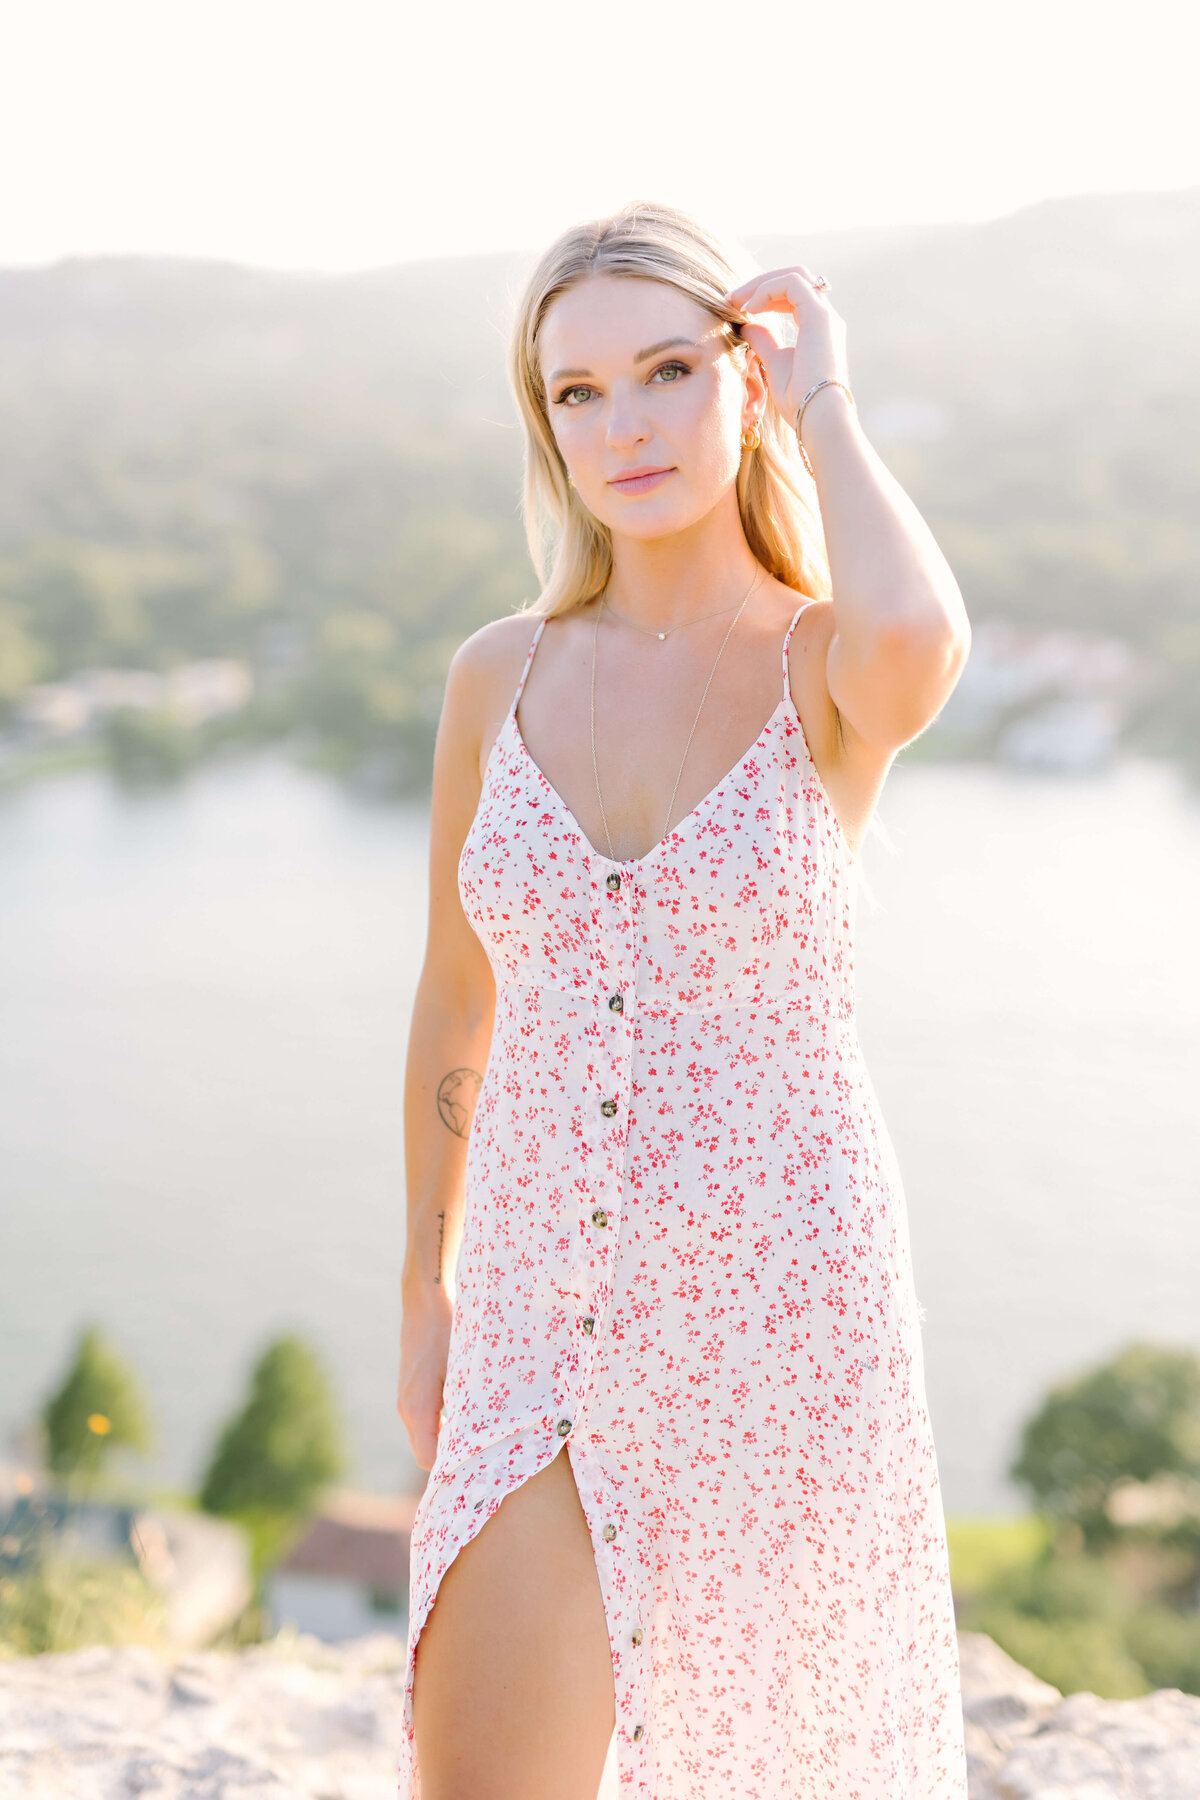 Engagement session at Mt. Bonnell in Austin, Texas